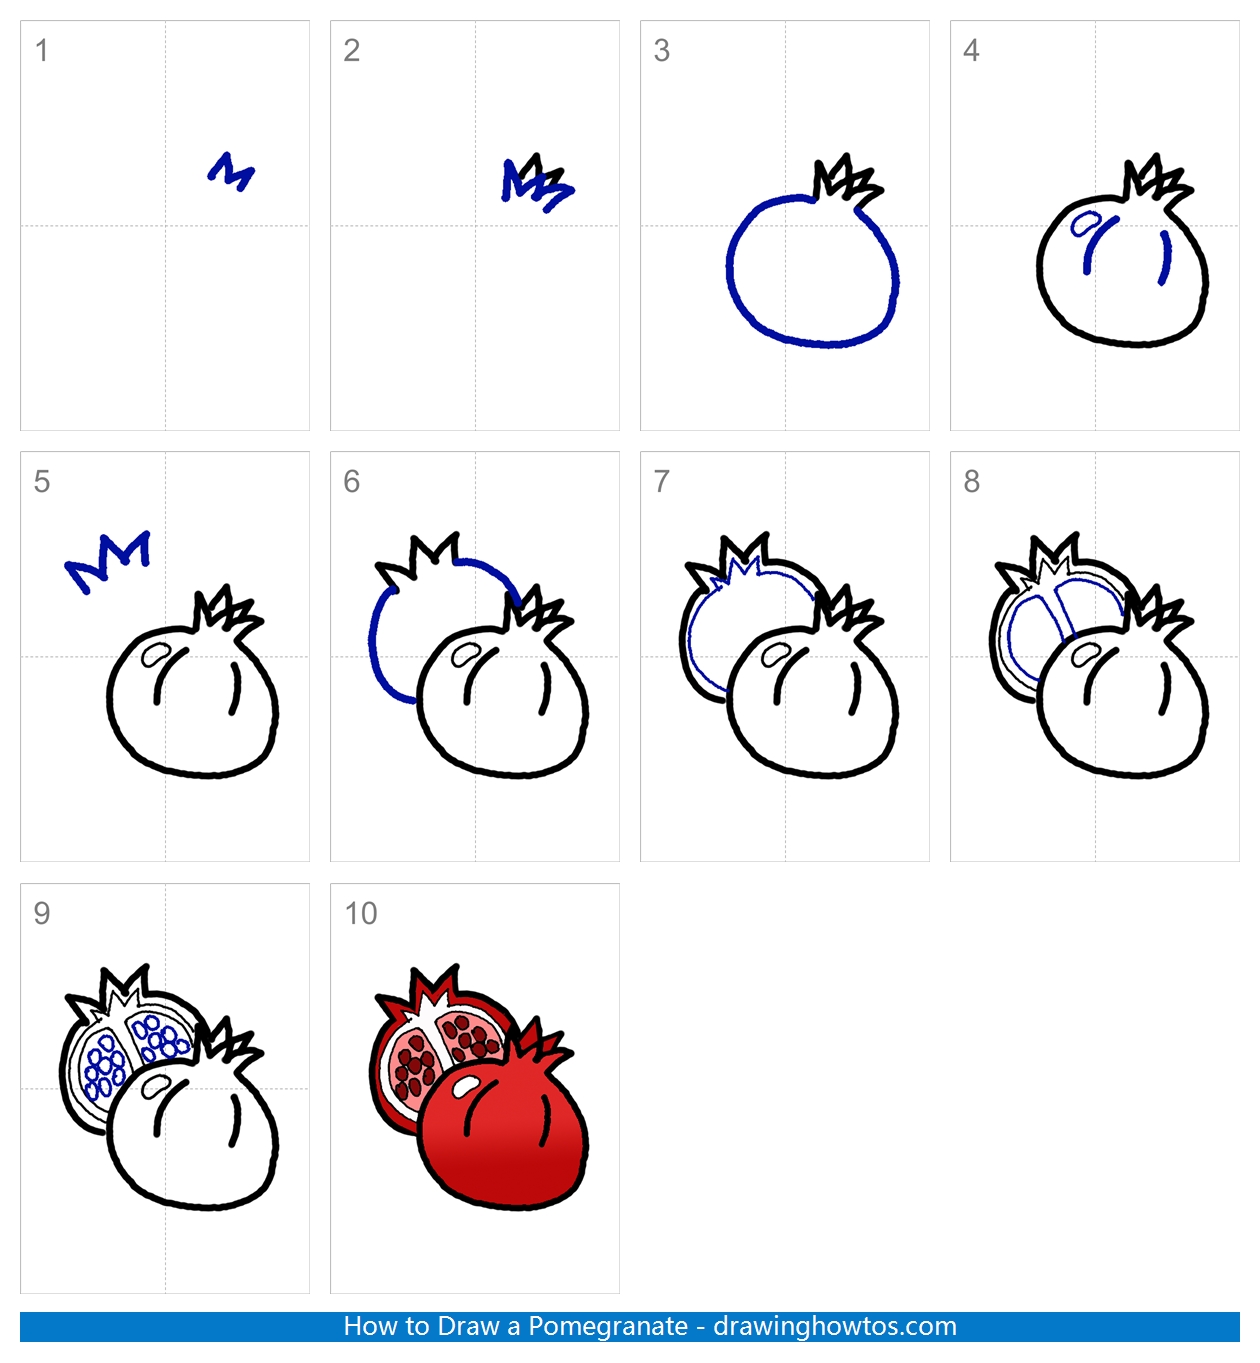 How to Draw a Pomegranate Step by Step